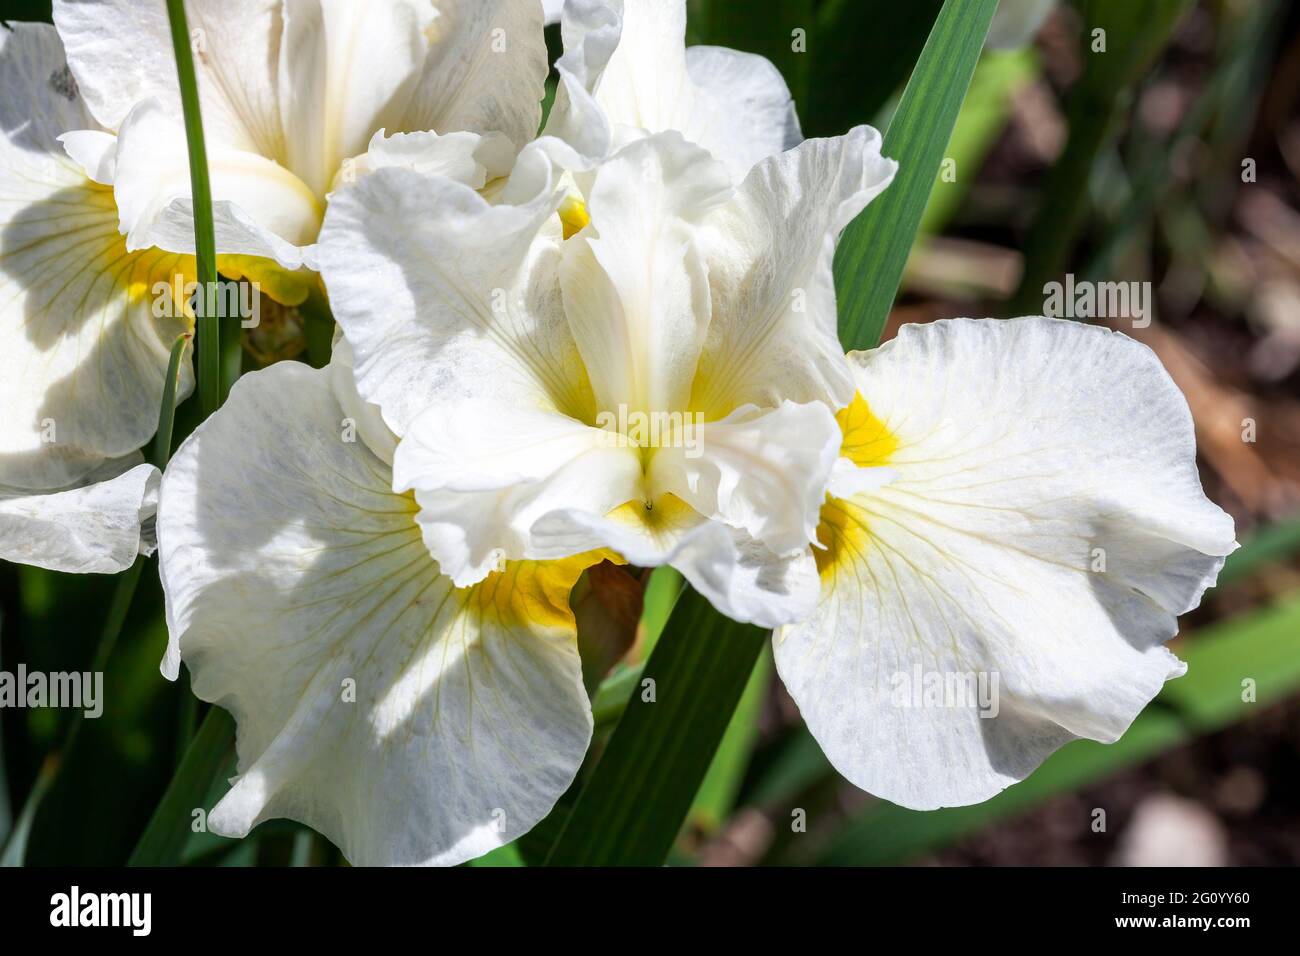 Iris sibirica 'Silver Queen' a summer flowering plant with a white summertime flower commonly known as Siberian flag, stock photo image Stock Photo